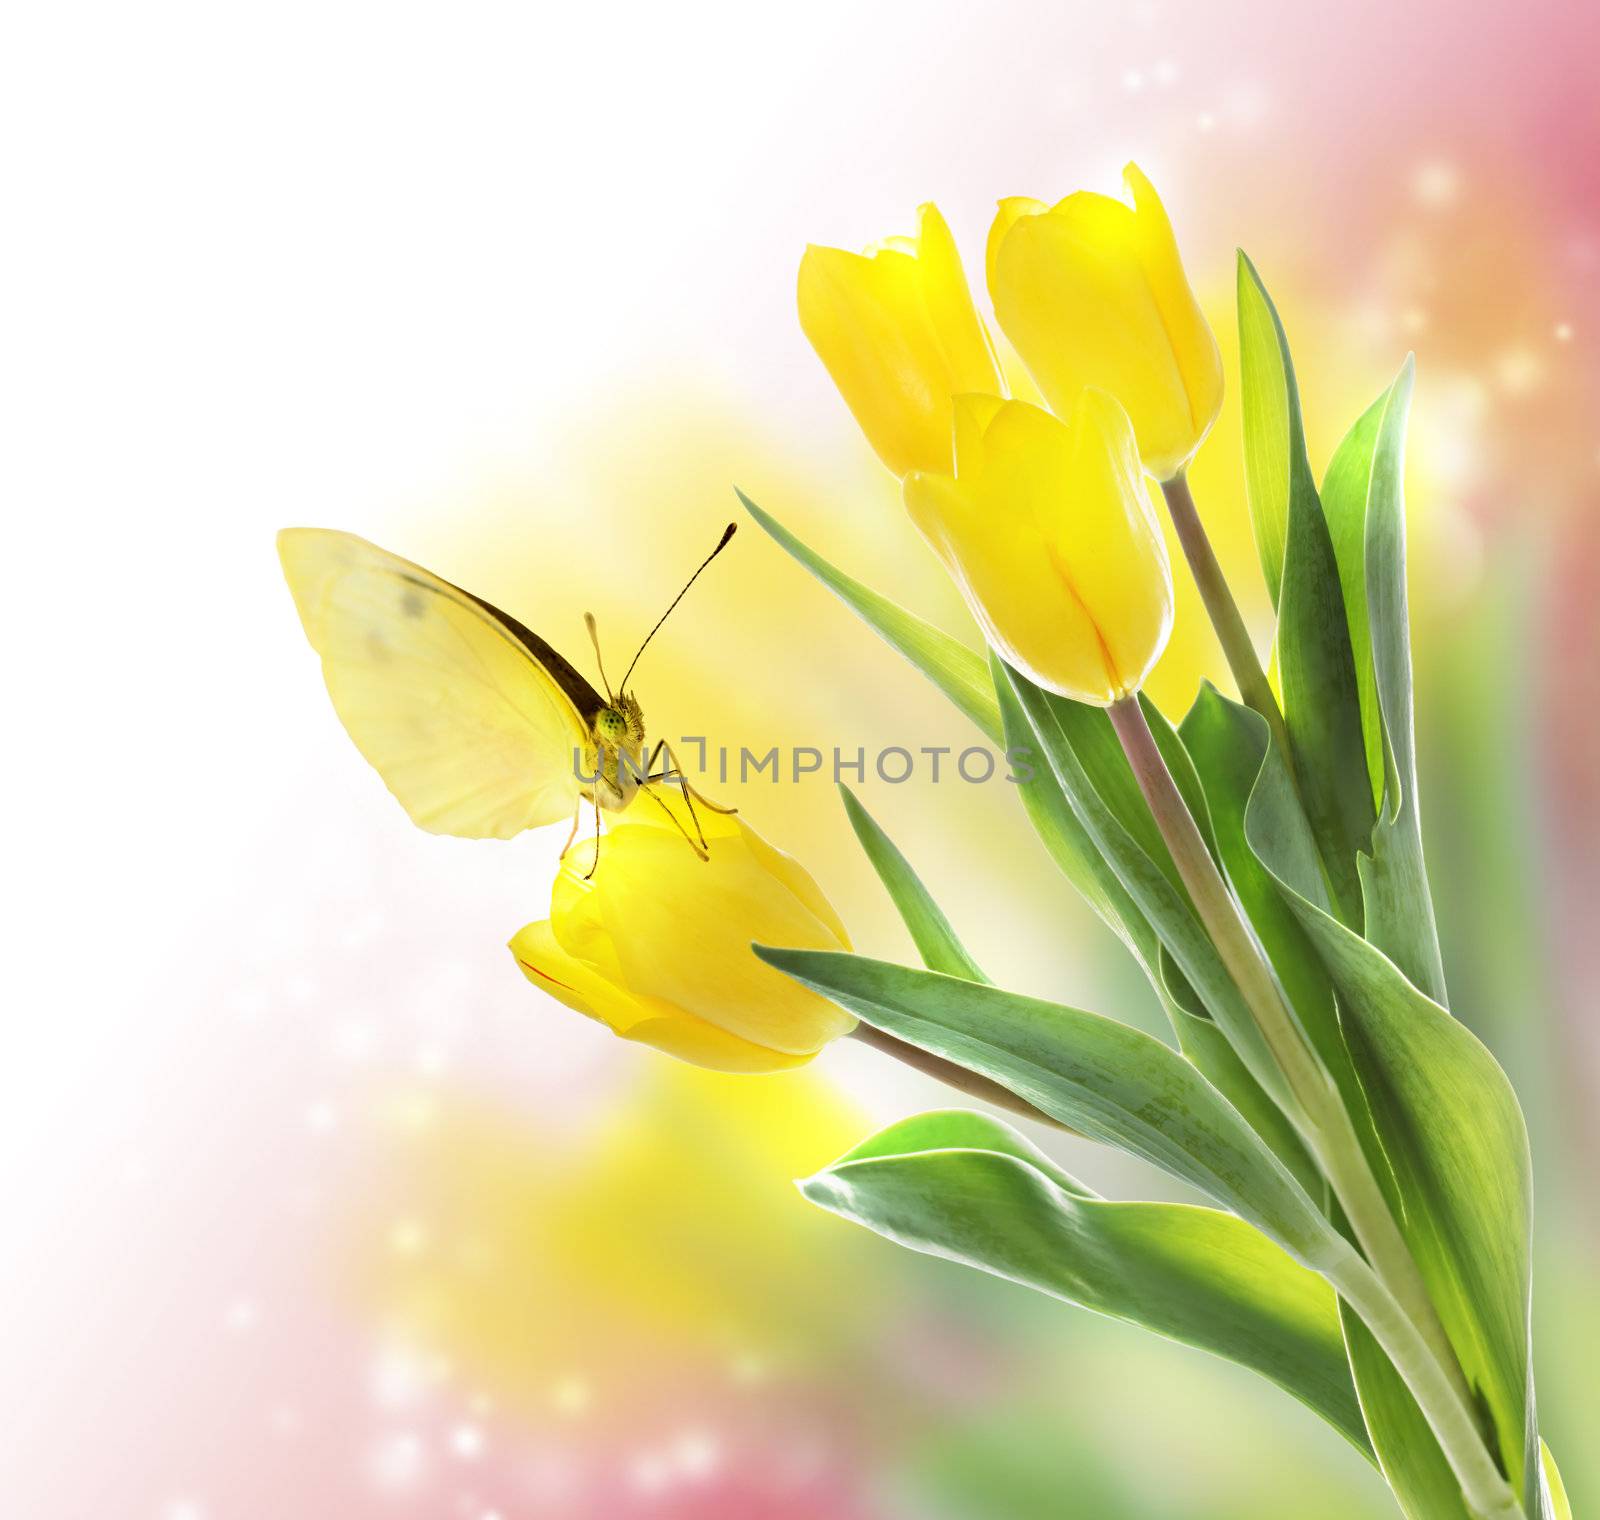 Yellow Tulips with a Butterfly on Pink Soft Light Background